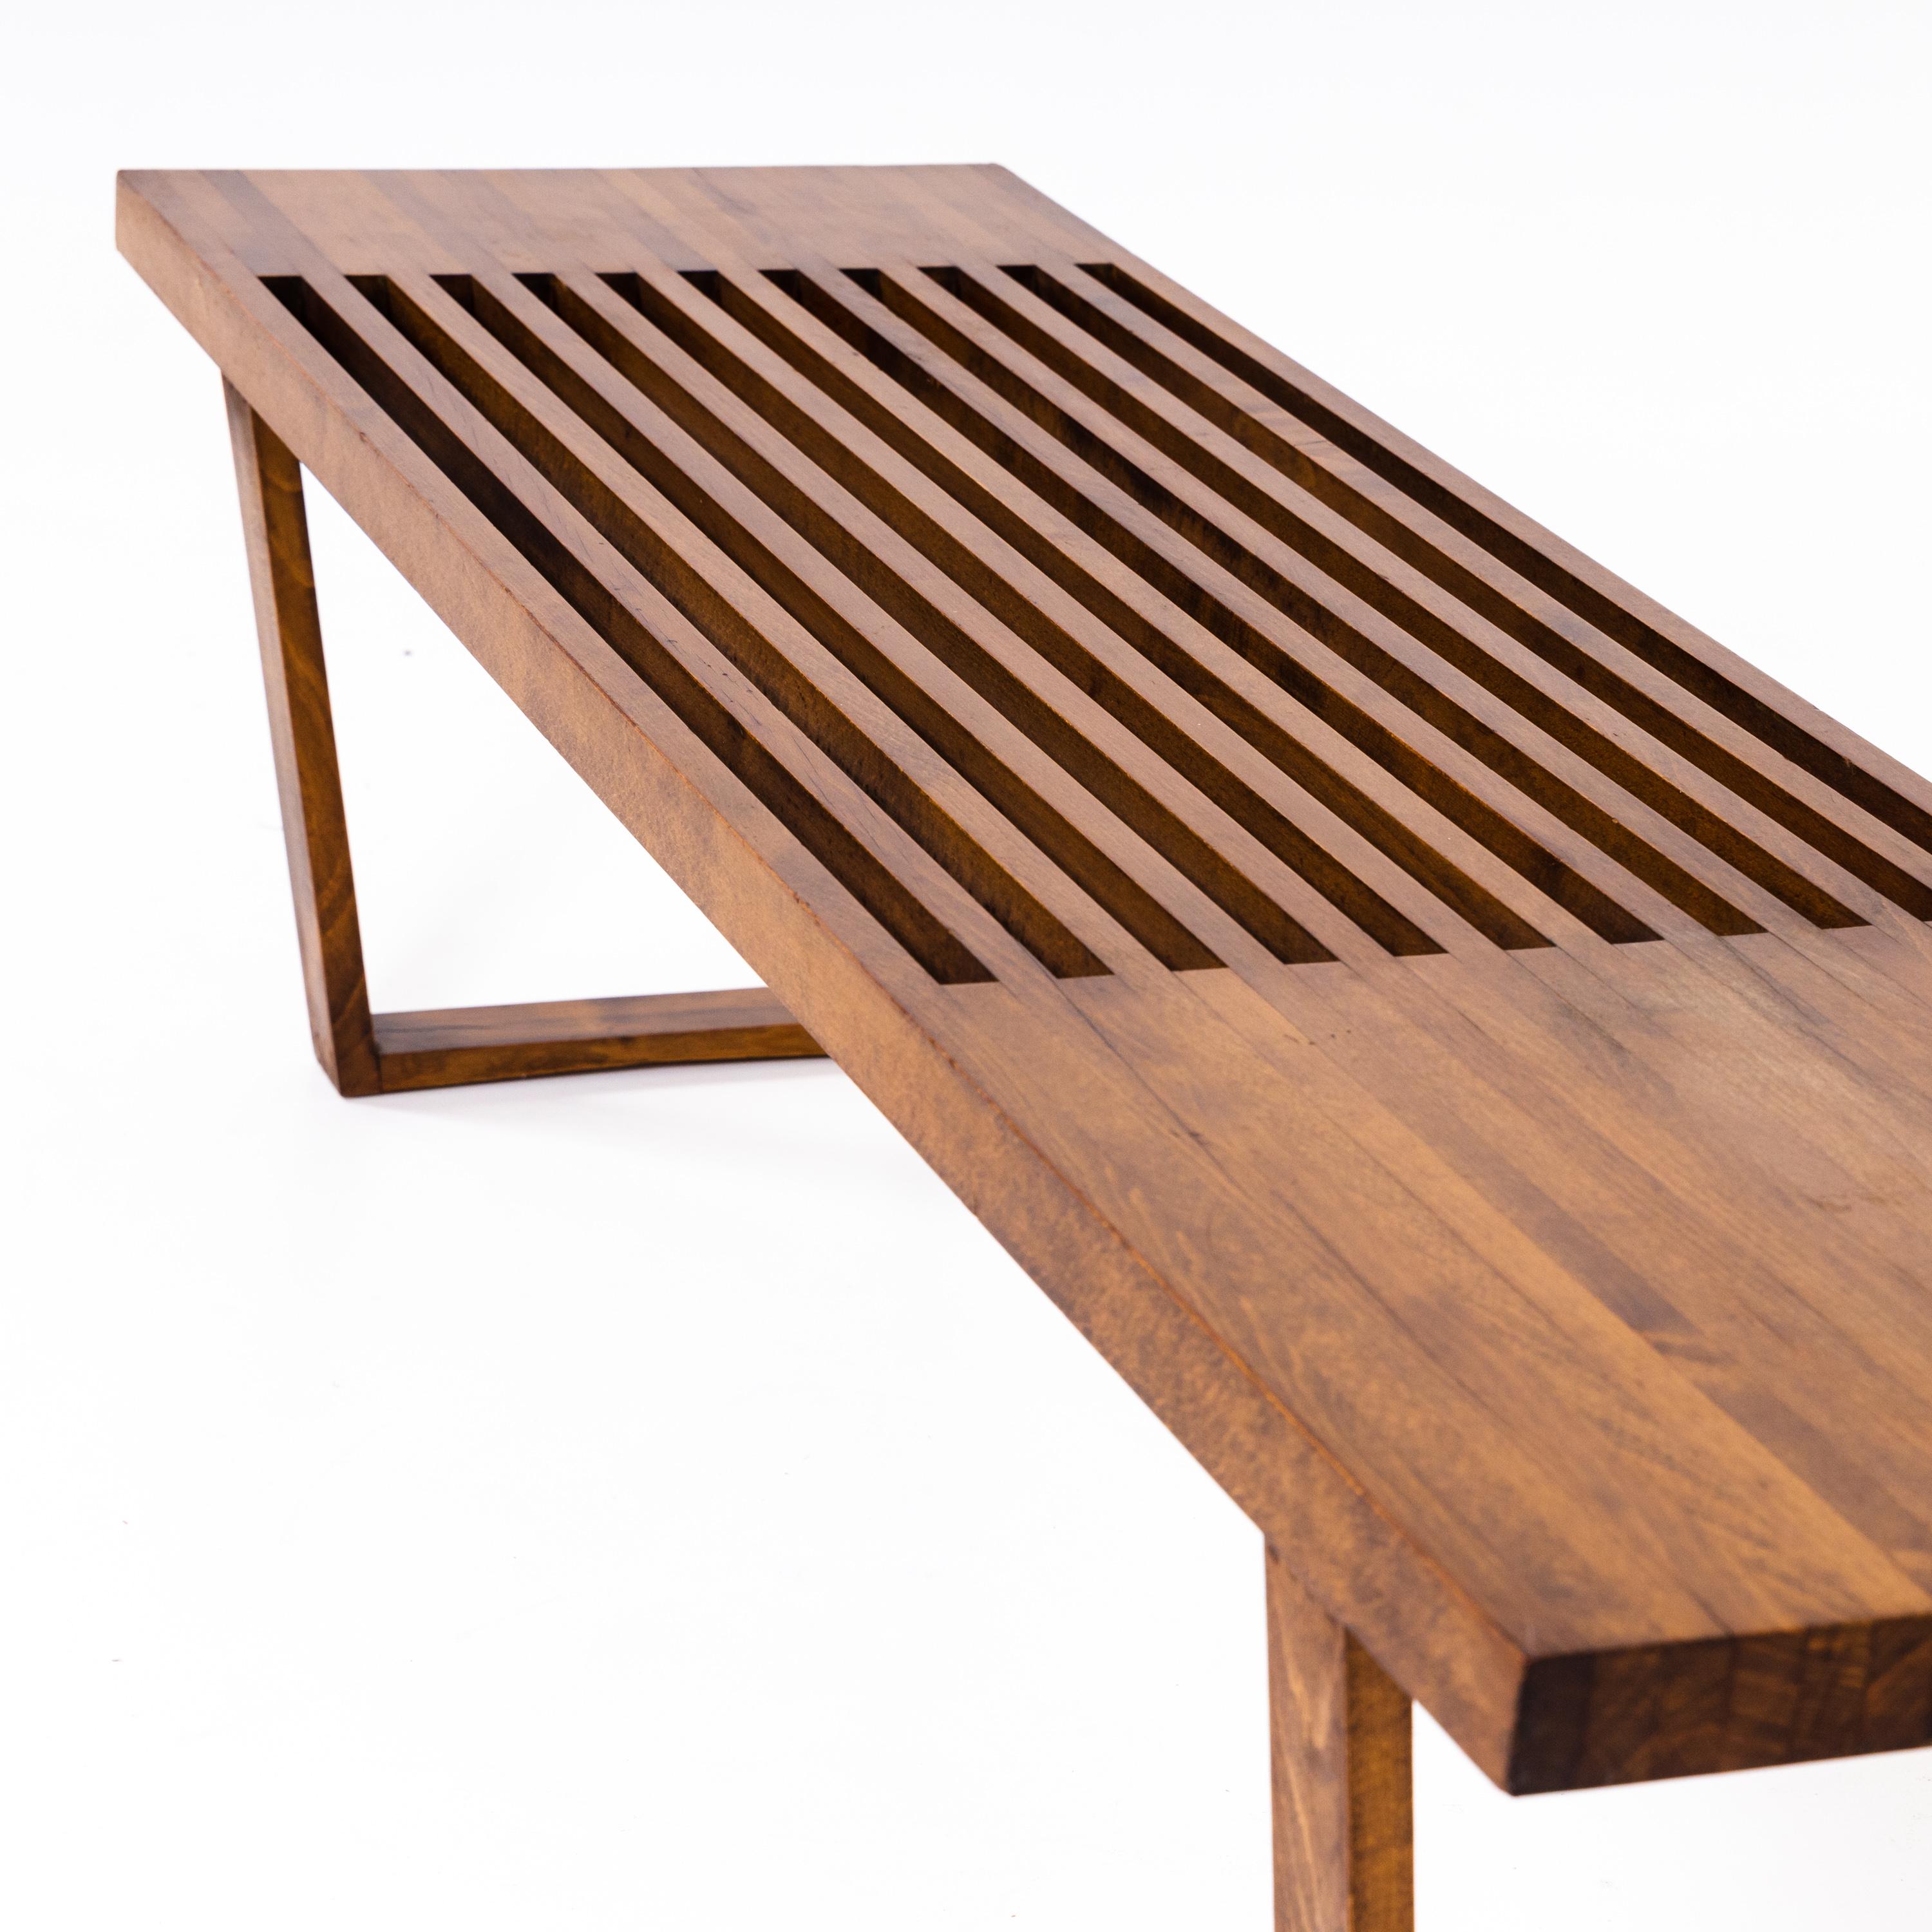 Wood Slat Bench in the Style of George Nelson, Mid-20th Century